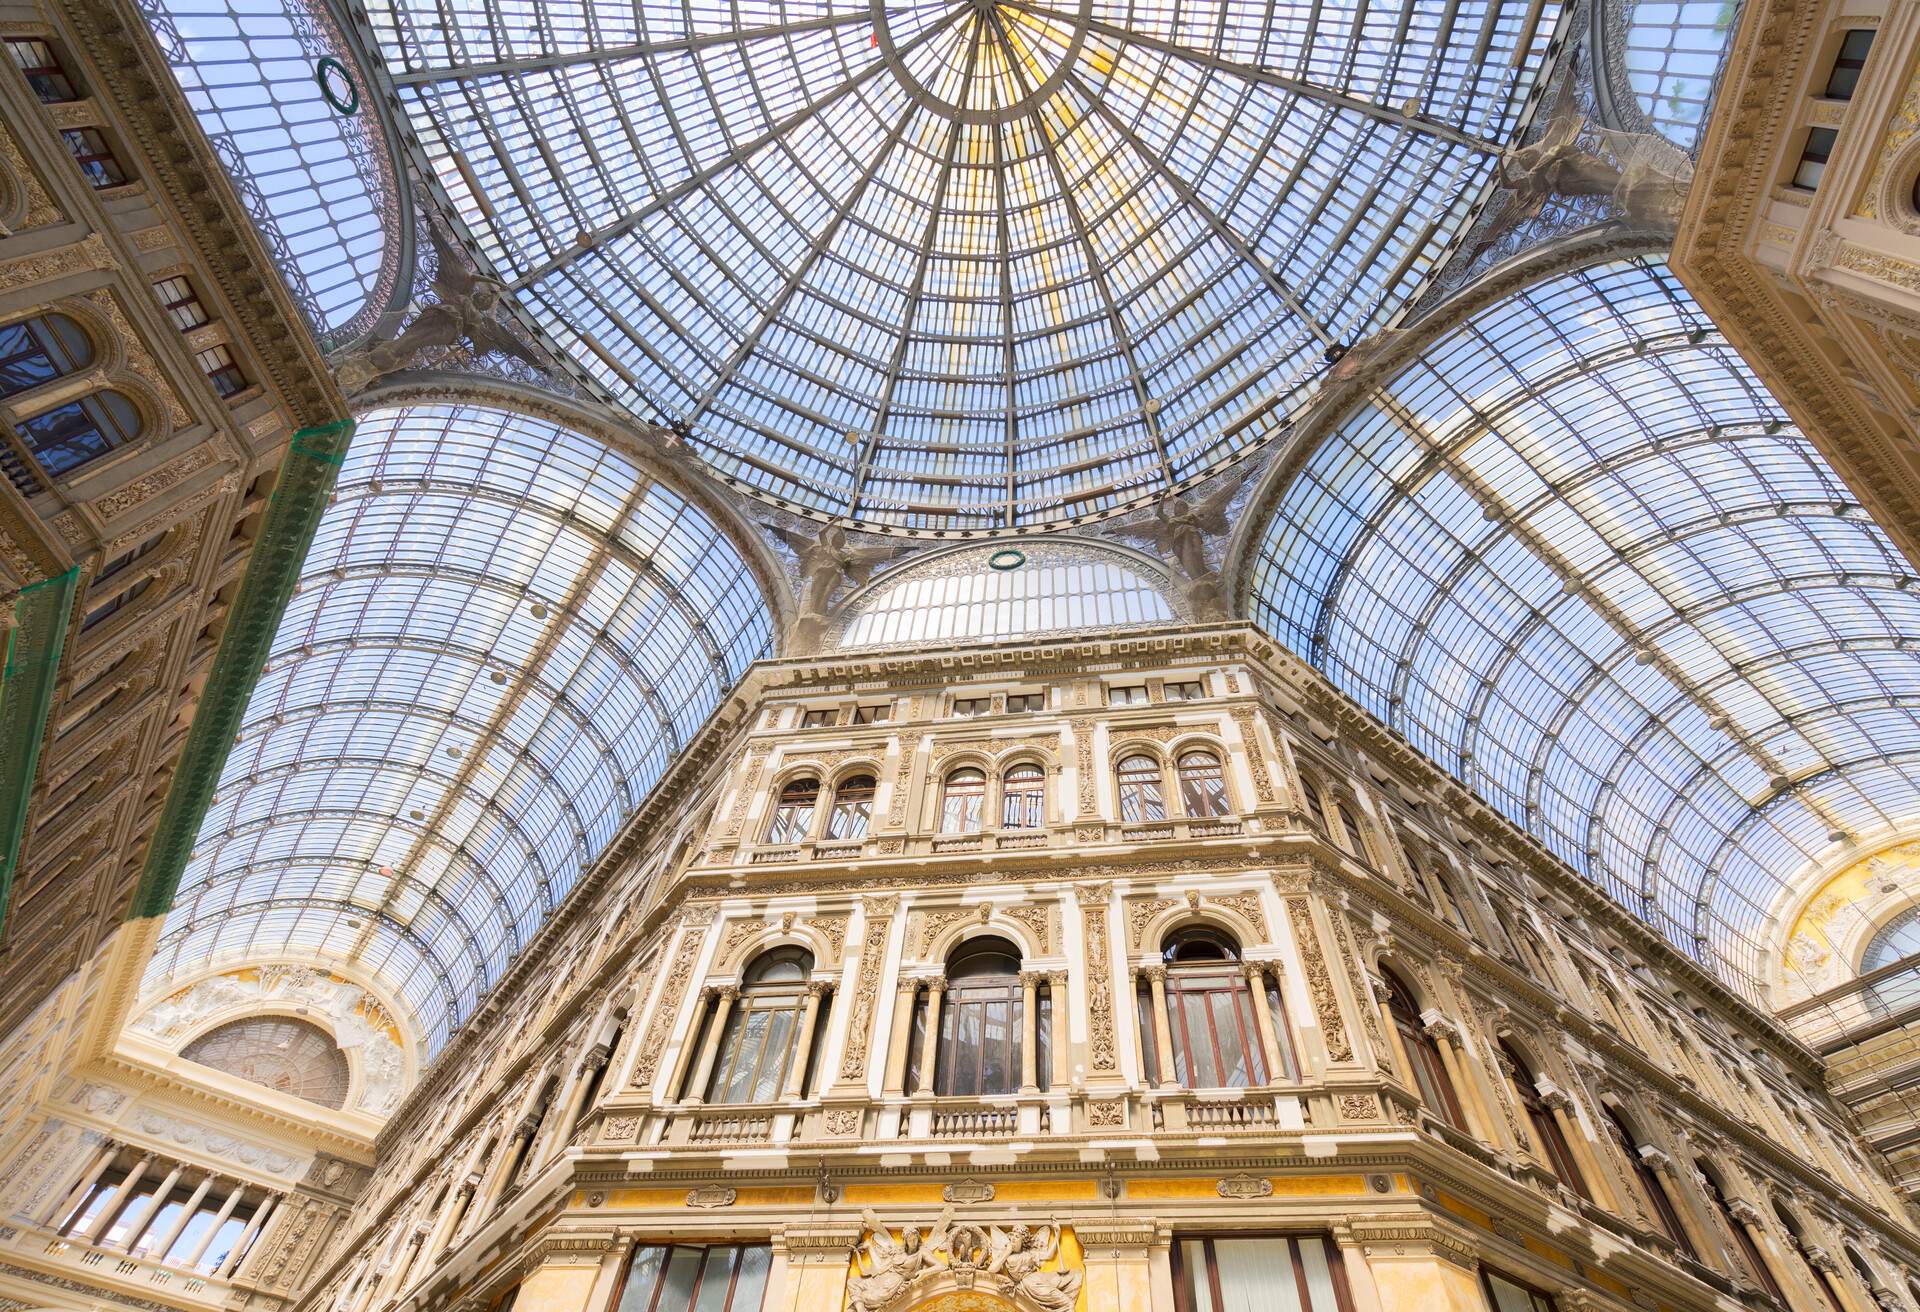 glass roof of Galleria Umberto I, public roofed shopping street gallery of XIXc. in Naples, Italy